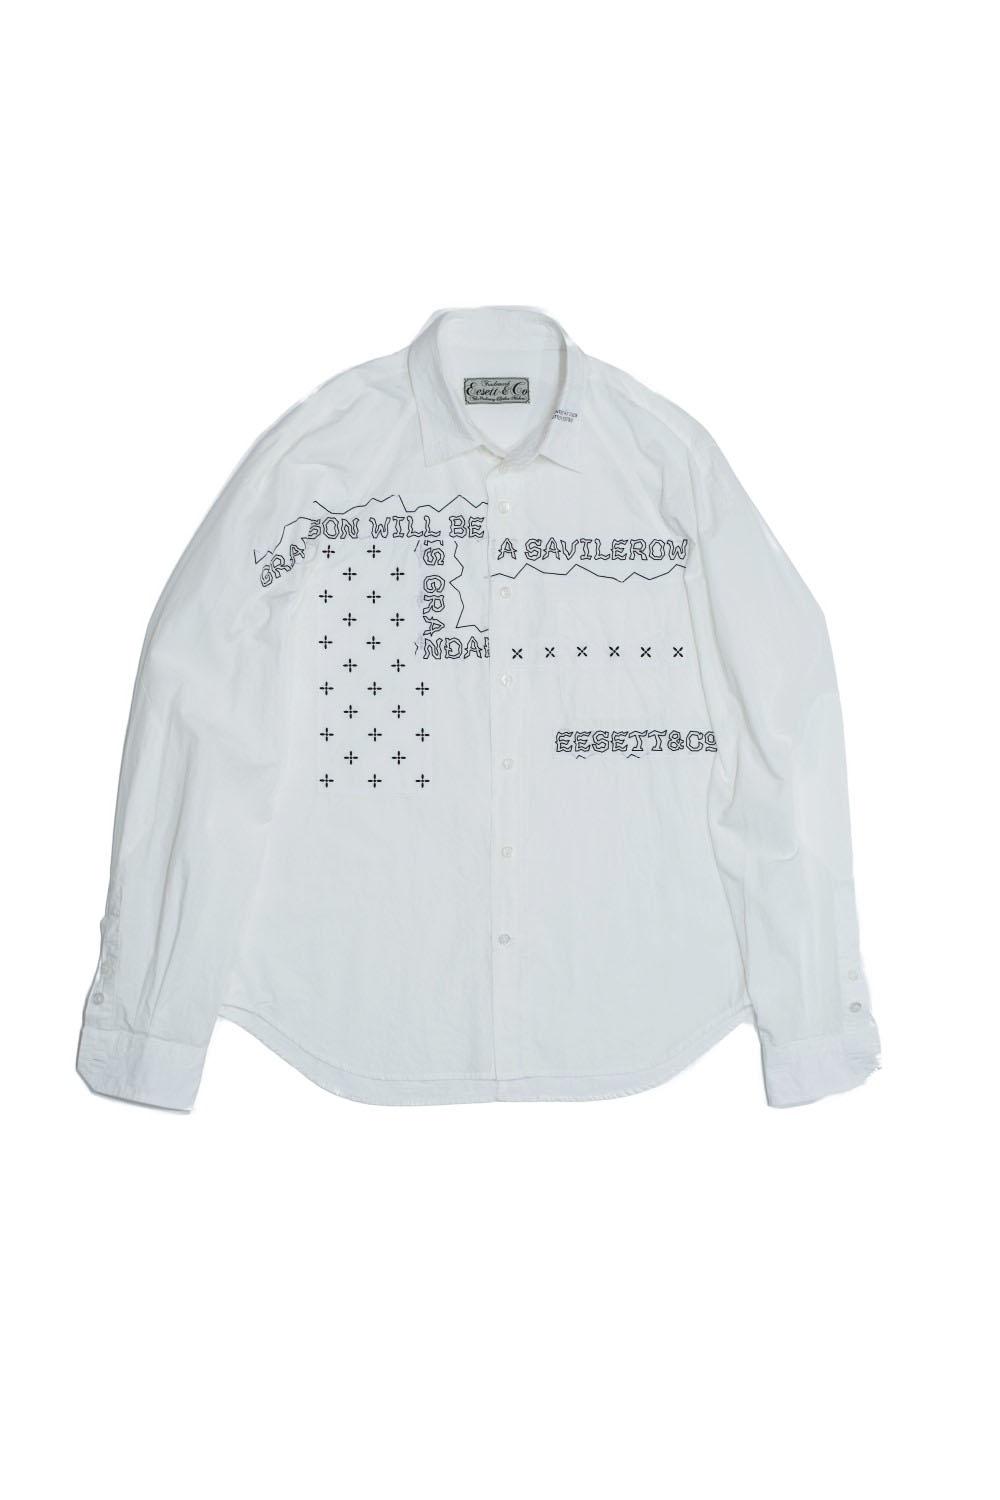 patched shirt white